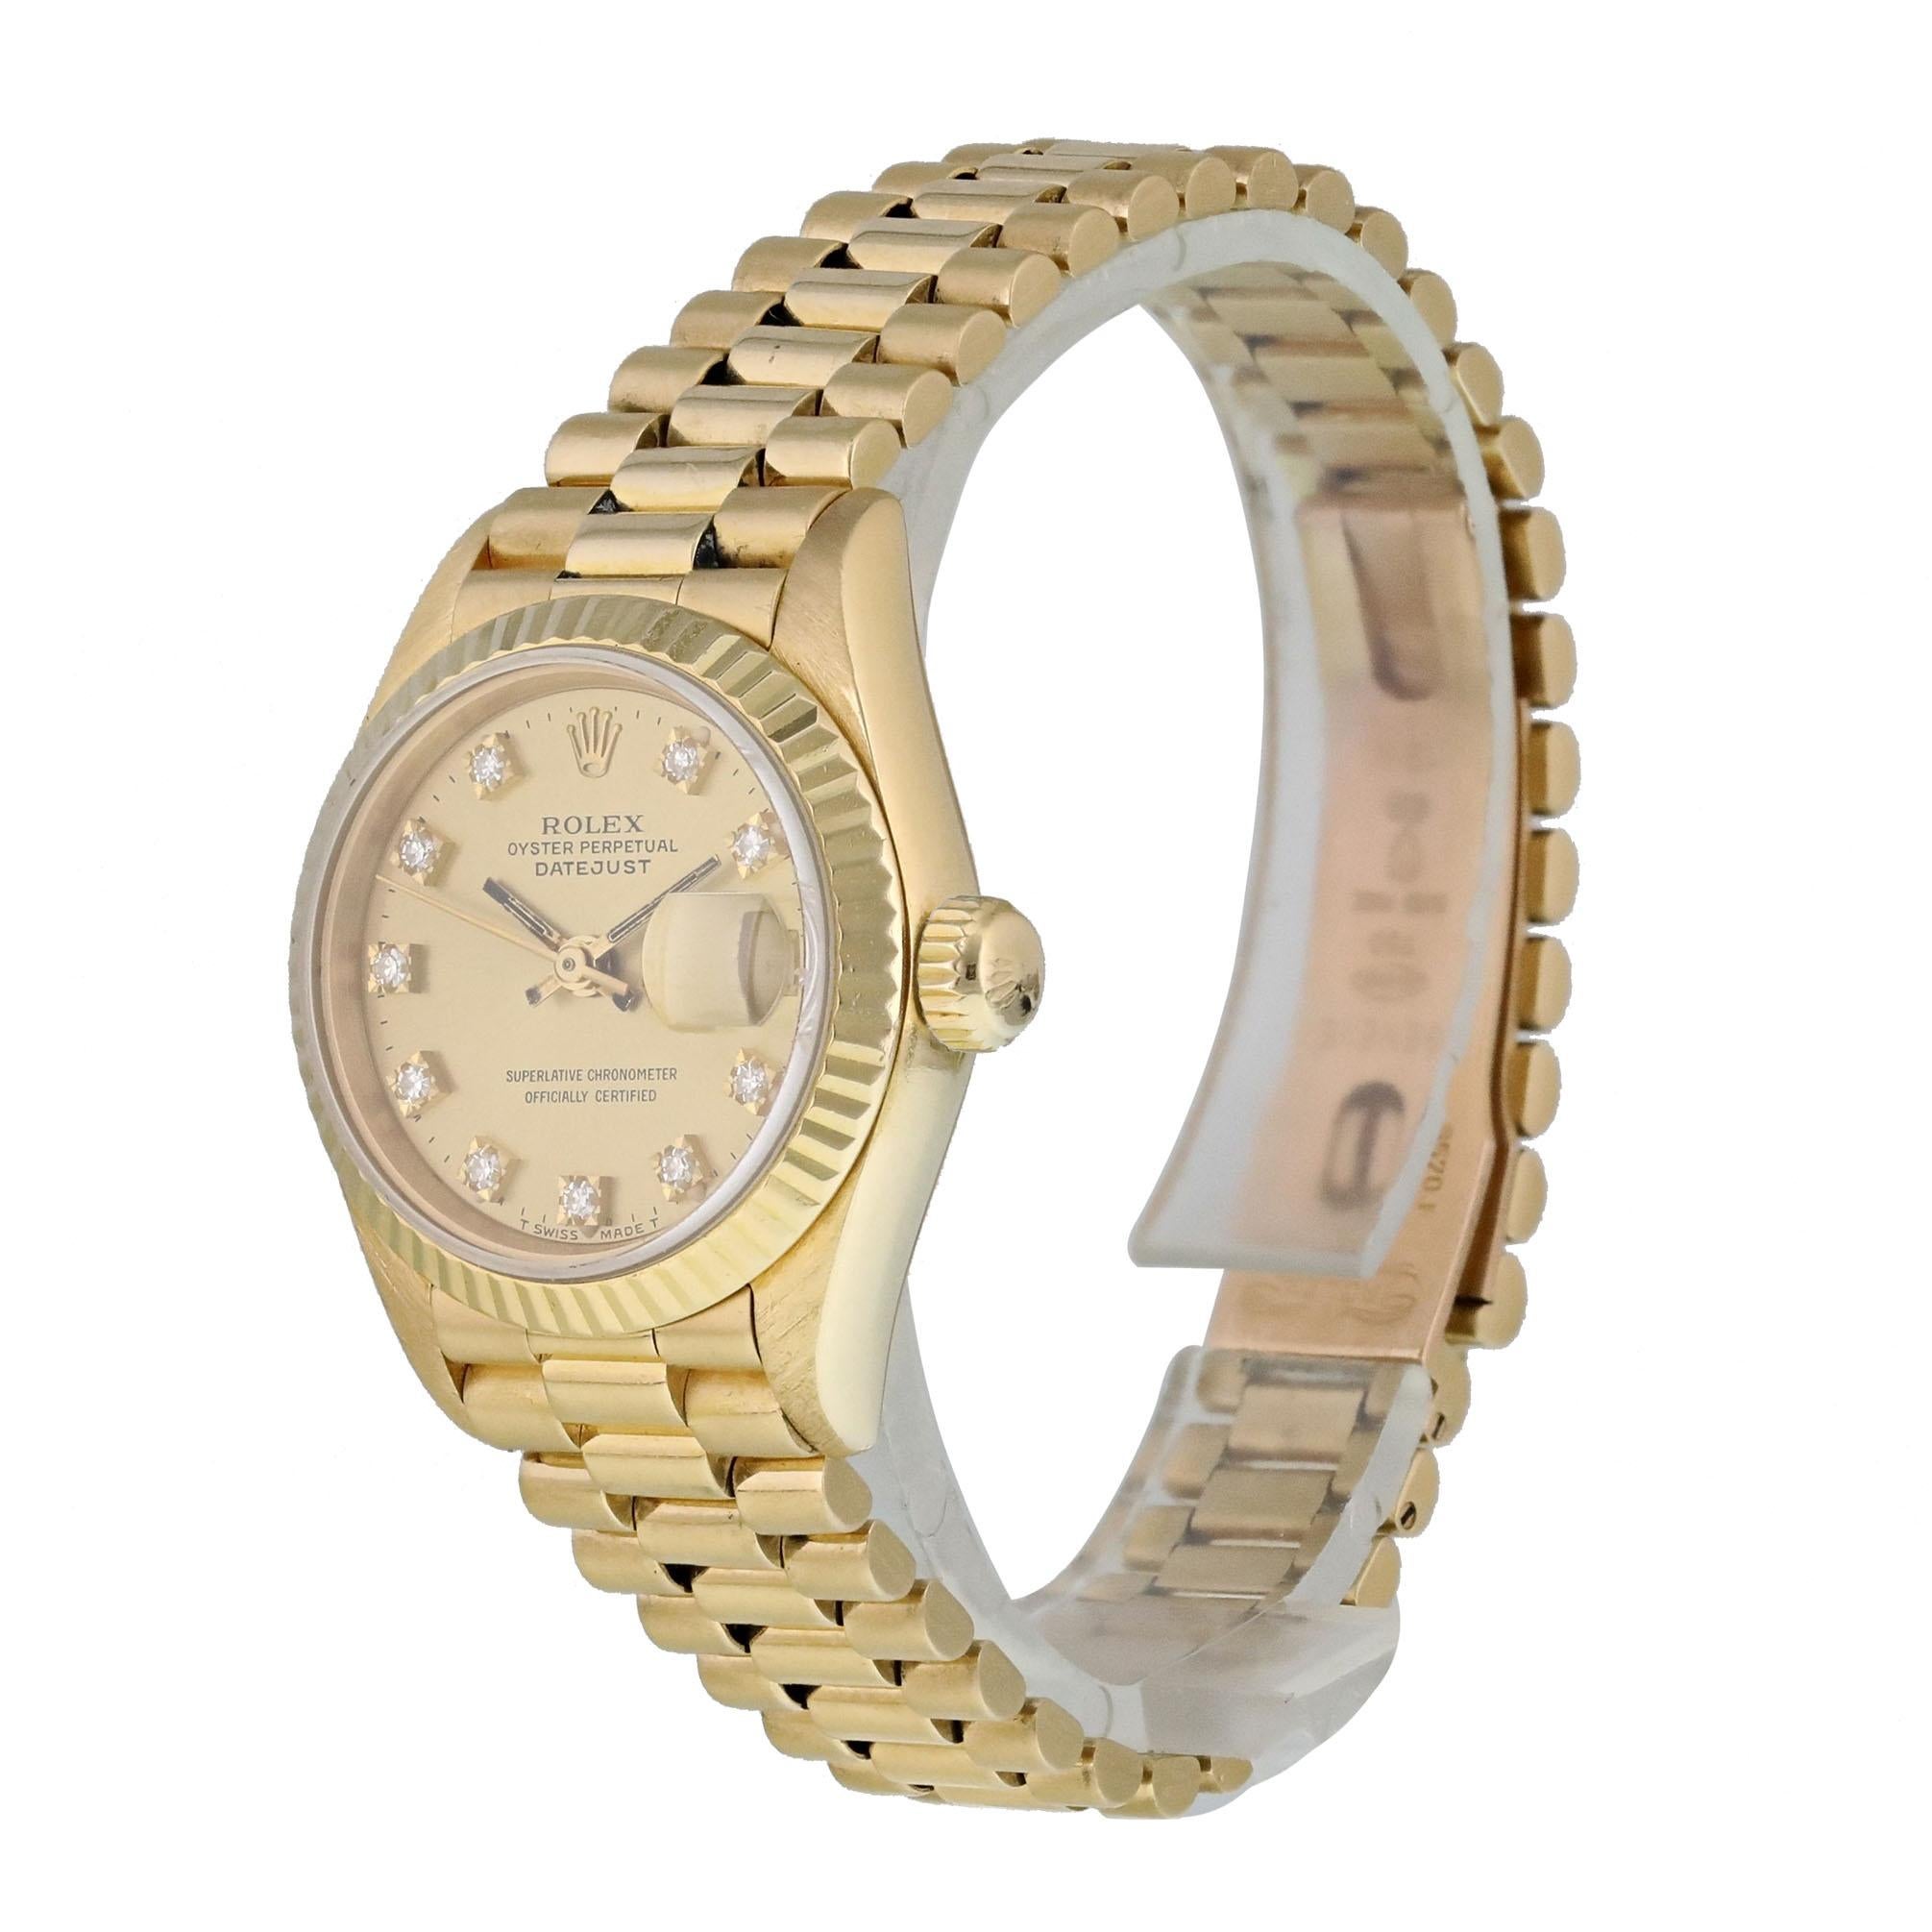 Rolex Datejust  69178 Ladies Watch. 
26mm 18k Yellow gold case. 
Yellow Gold None bezel. 
Champagne dial with luminous gold hands and factory set diamond hour markers. 
Minute markers on the outer dial. 
Date display at the 3 o'clock position.